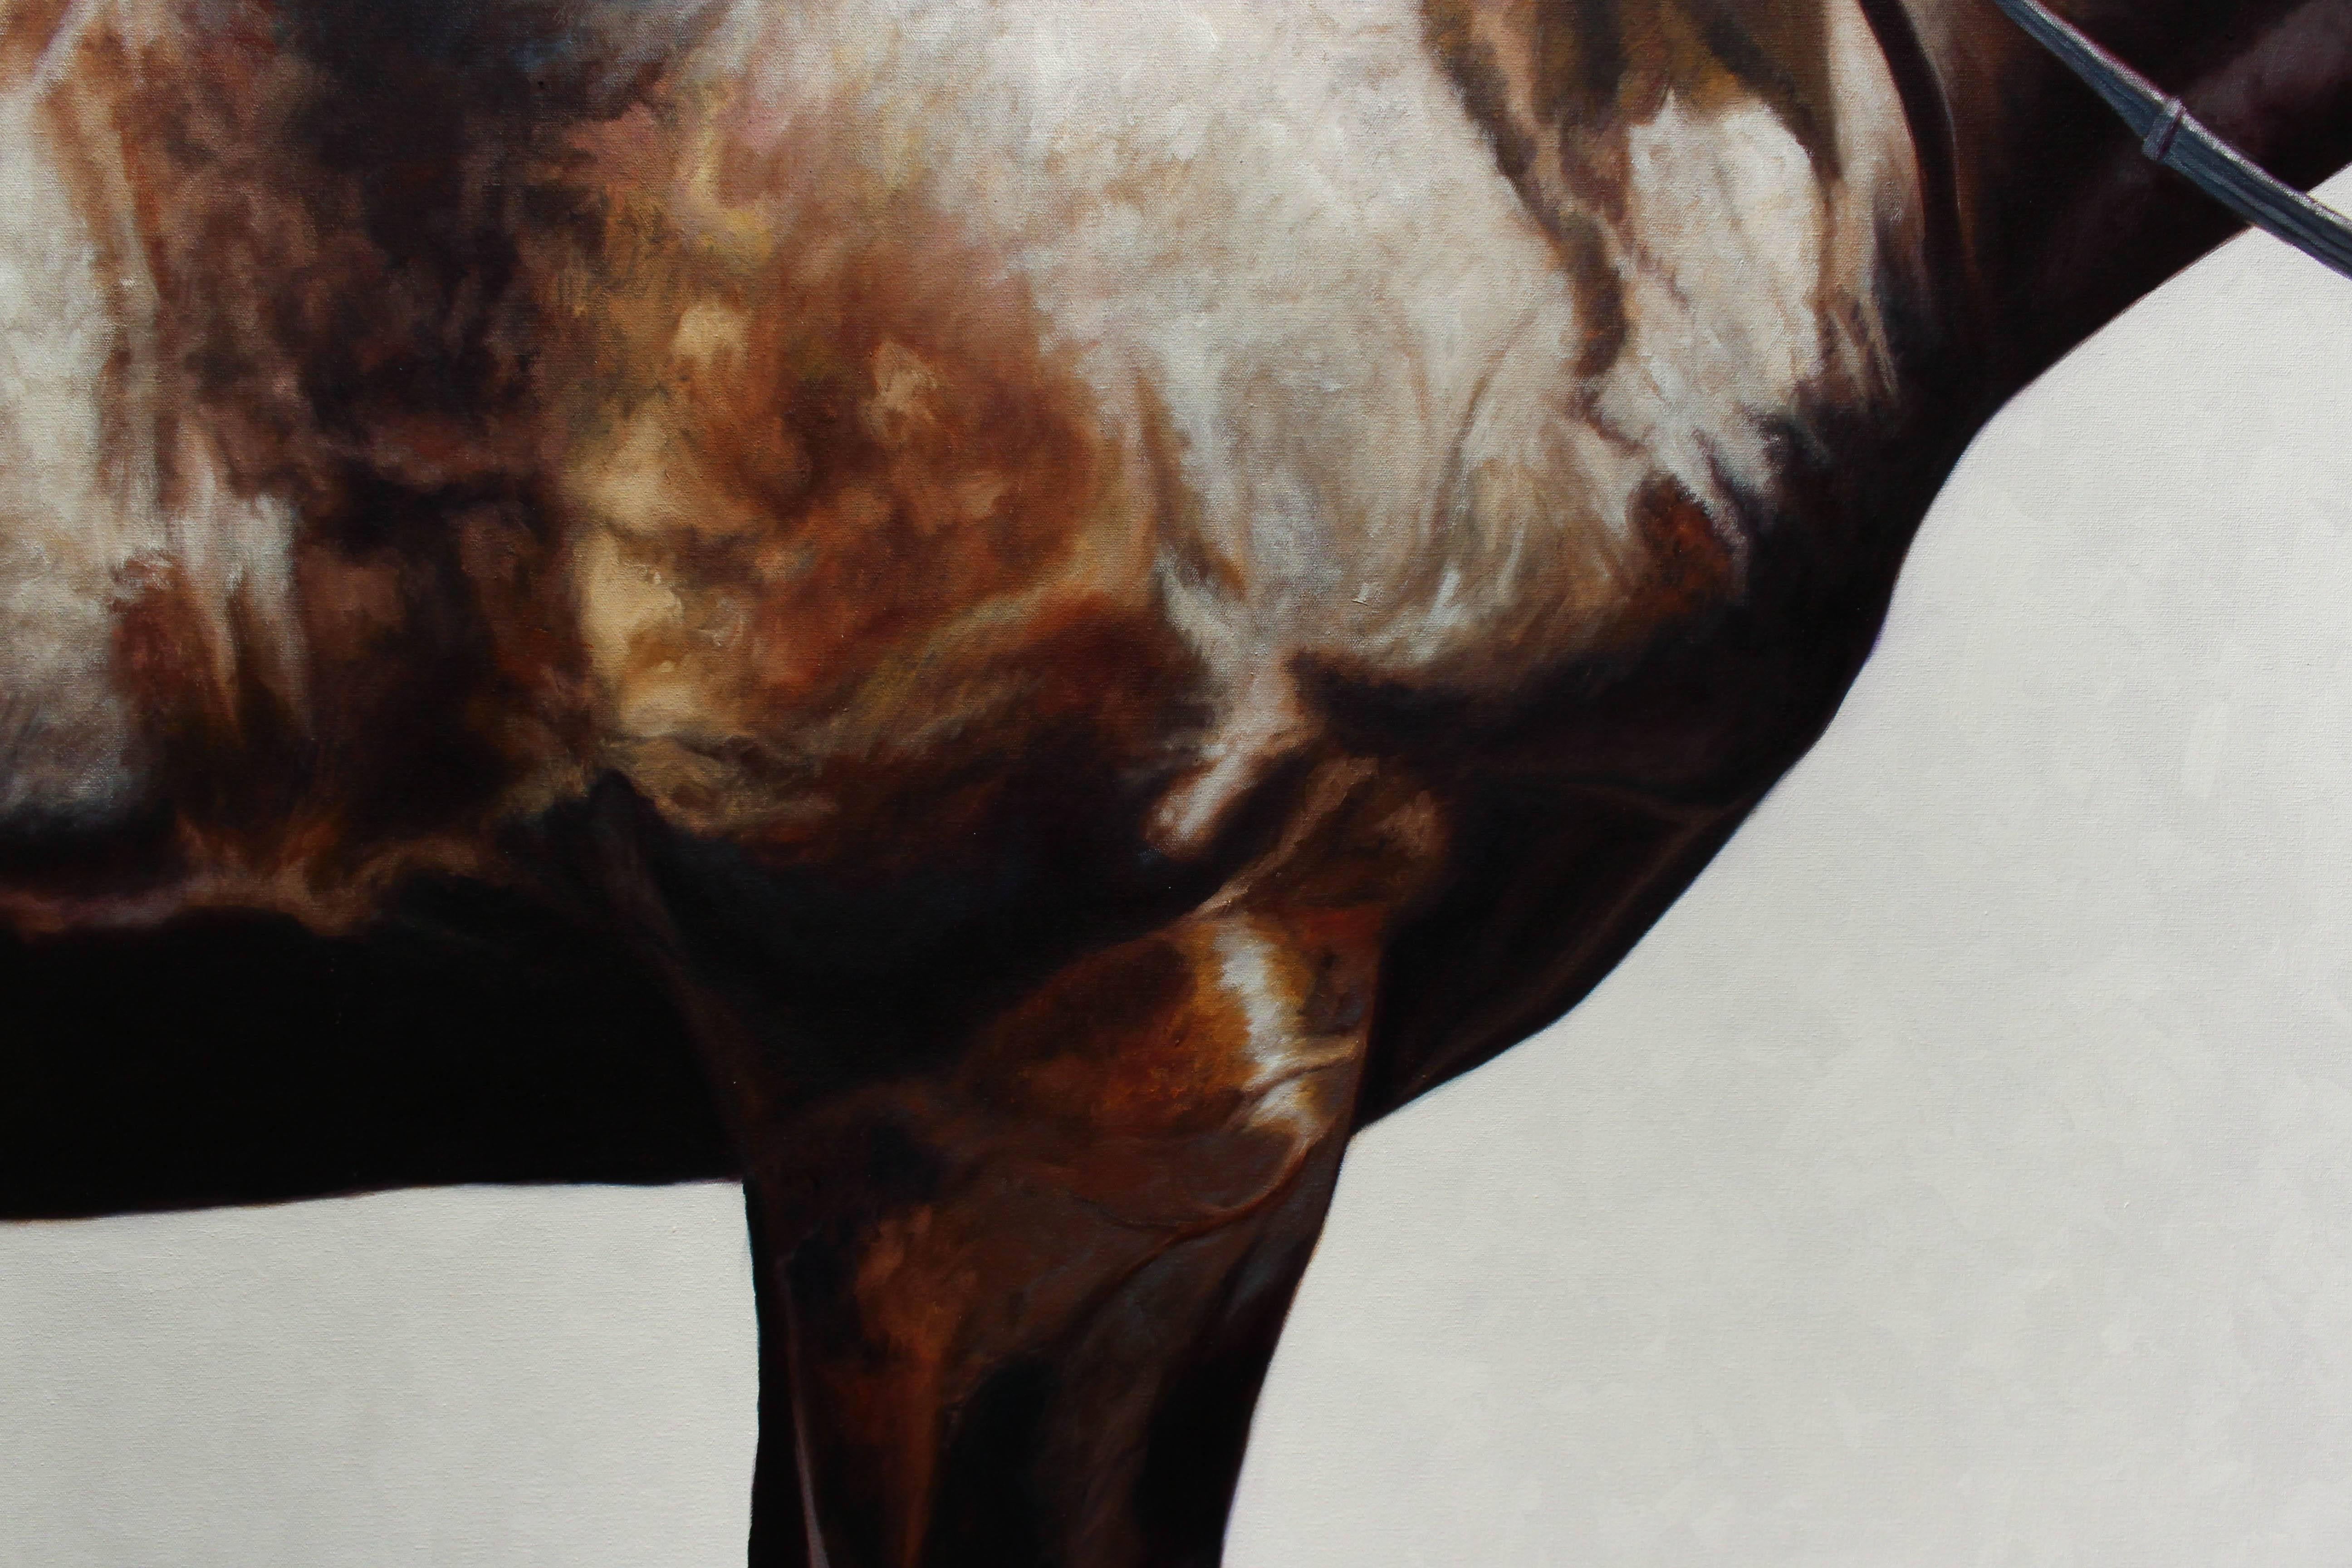 Julie Ferris is an equine portrait painter whose goal is to portray the strength & beauty of each subject.  Ferris explores the symbolism, history & the highly unique relationship humankind & the horse have shared over thousands of